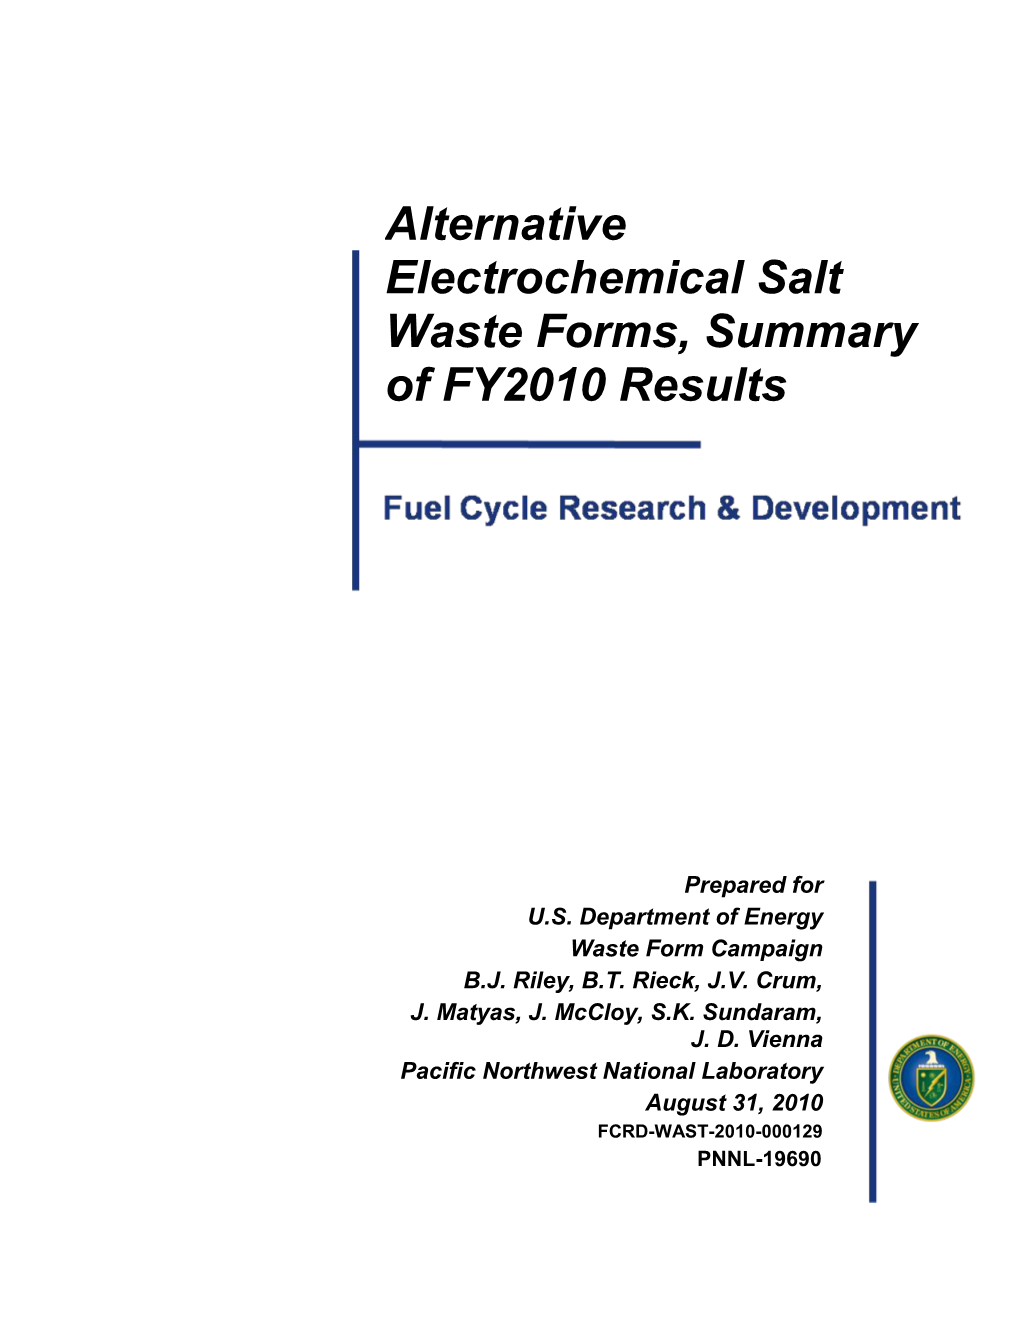 Alternative Electrochemical Salt Waste Forms, Summary of FY2010 Results